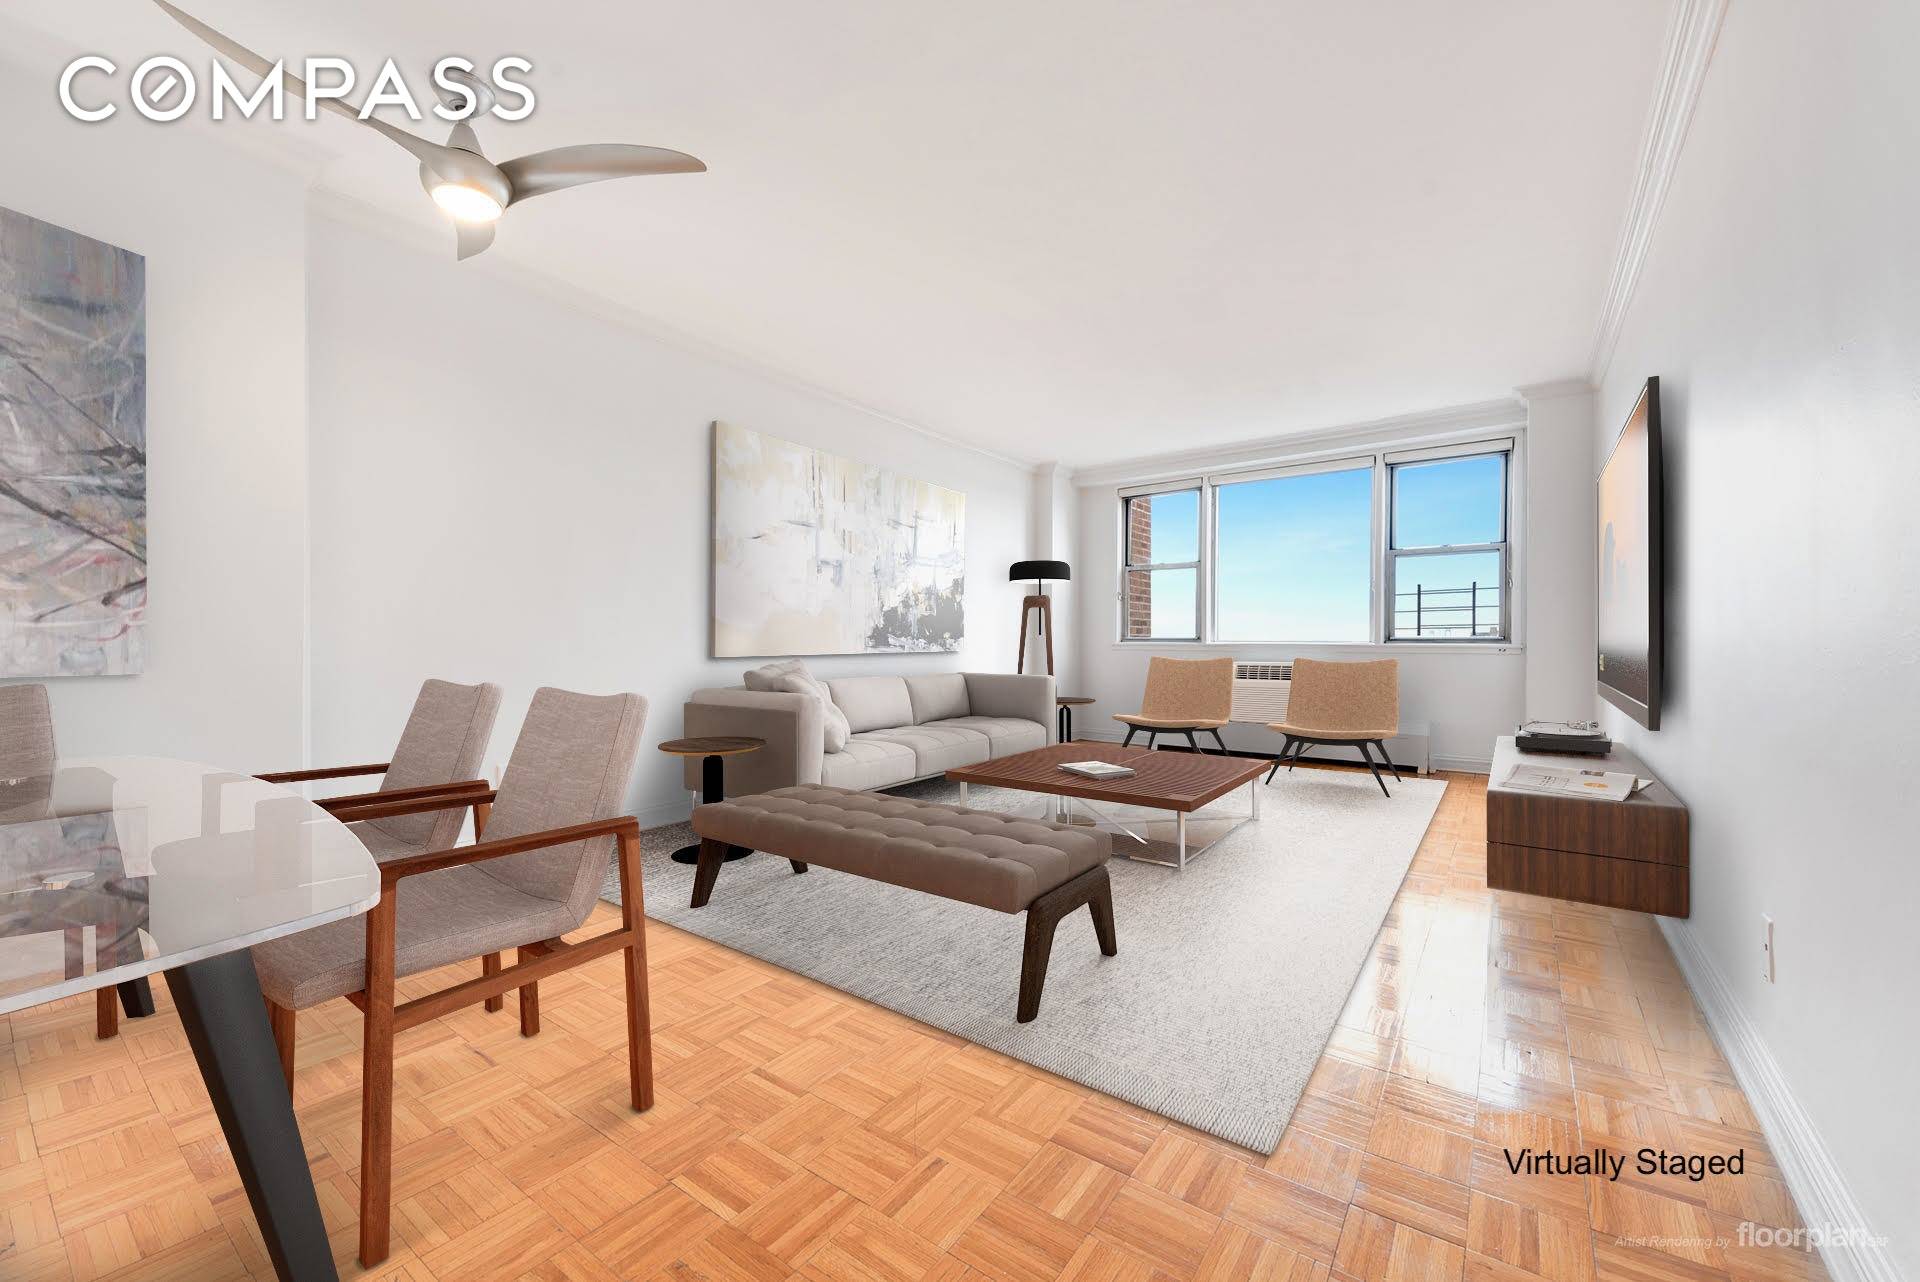 Don't miss this rarely available one bedroom, one bathroom home featuring exceptional space and great updates in an amenity rich East Flatbush co op.